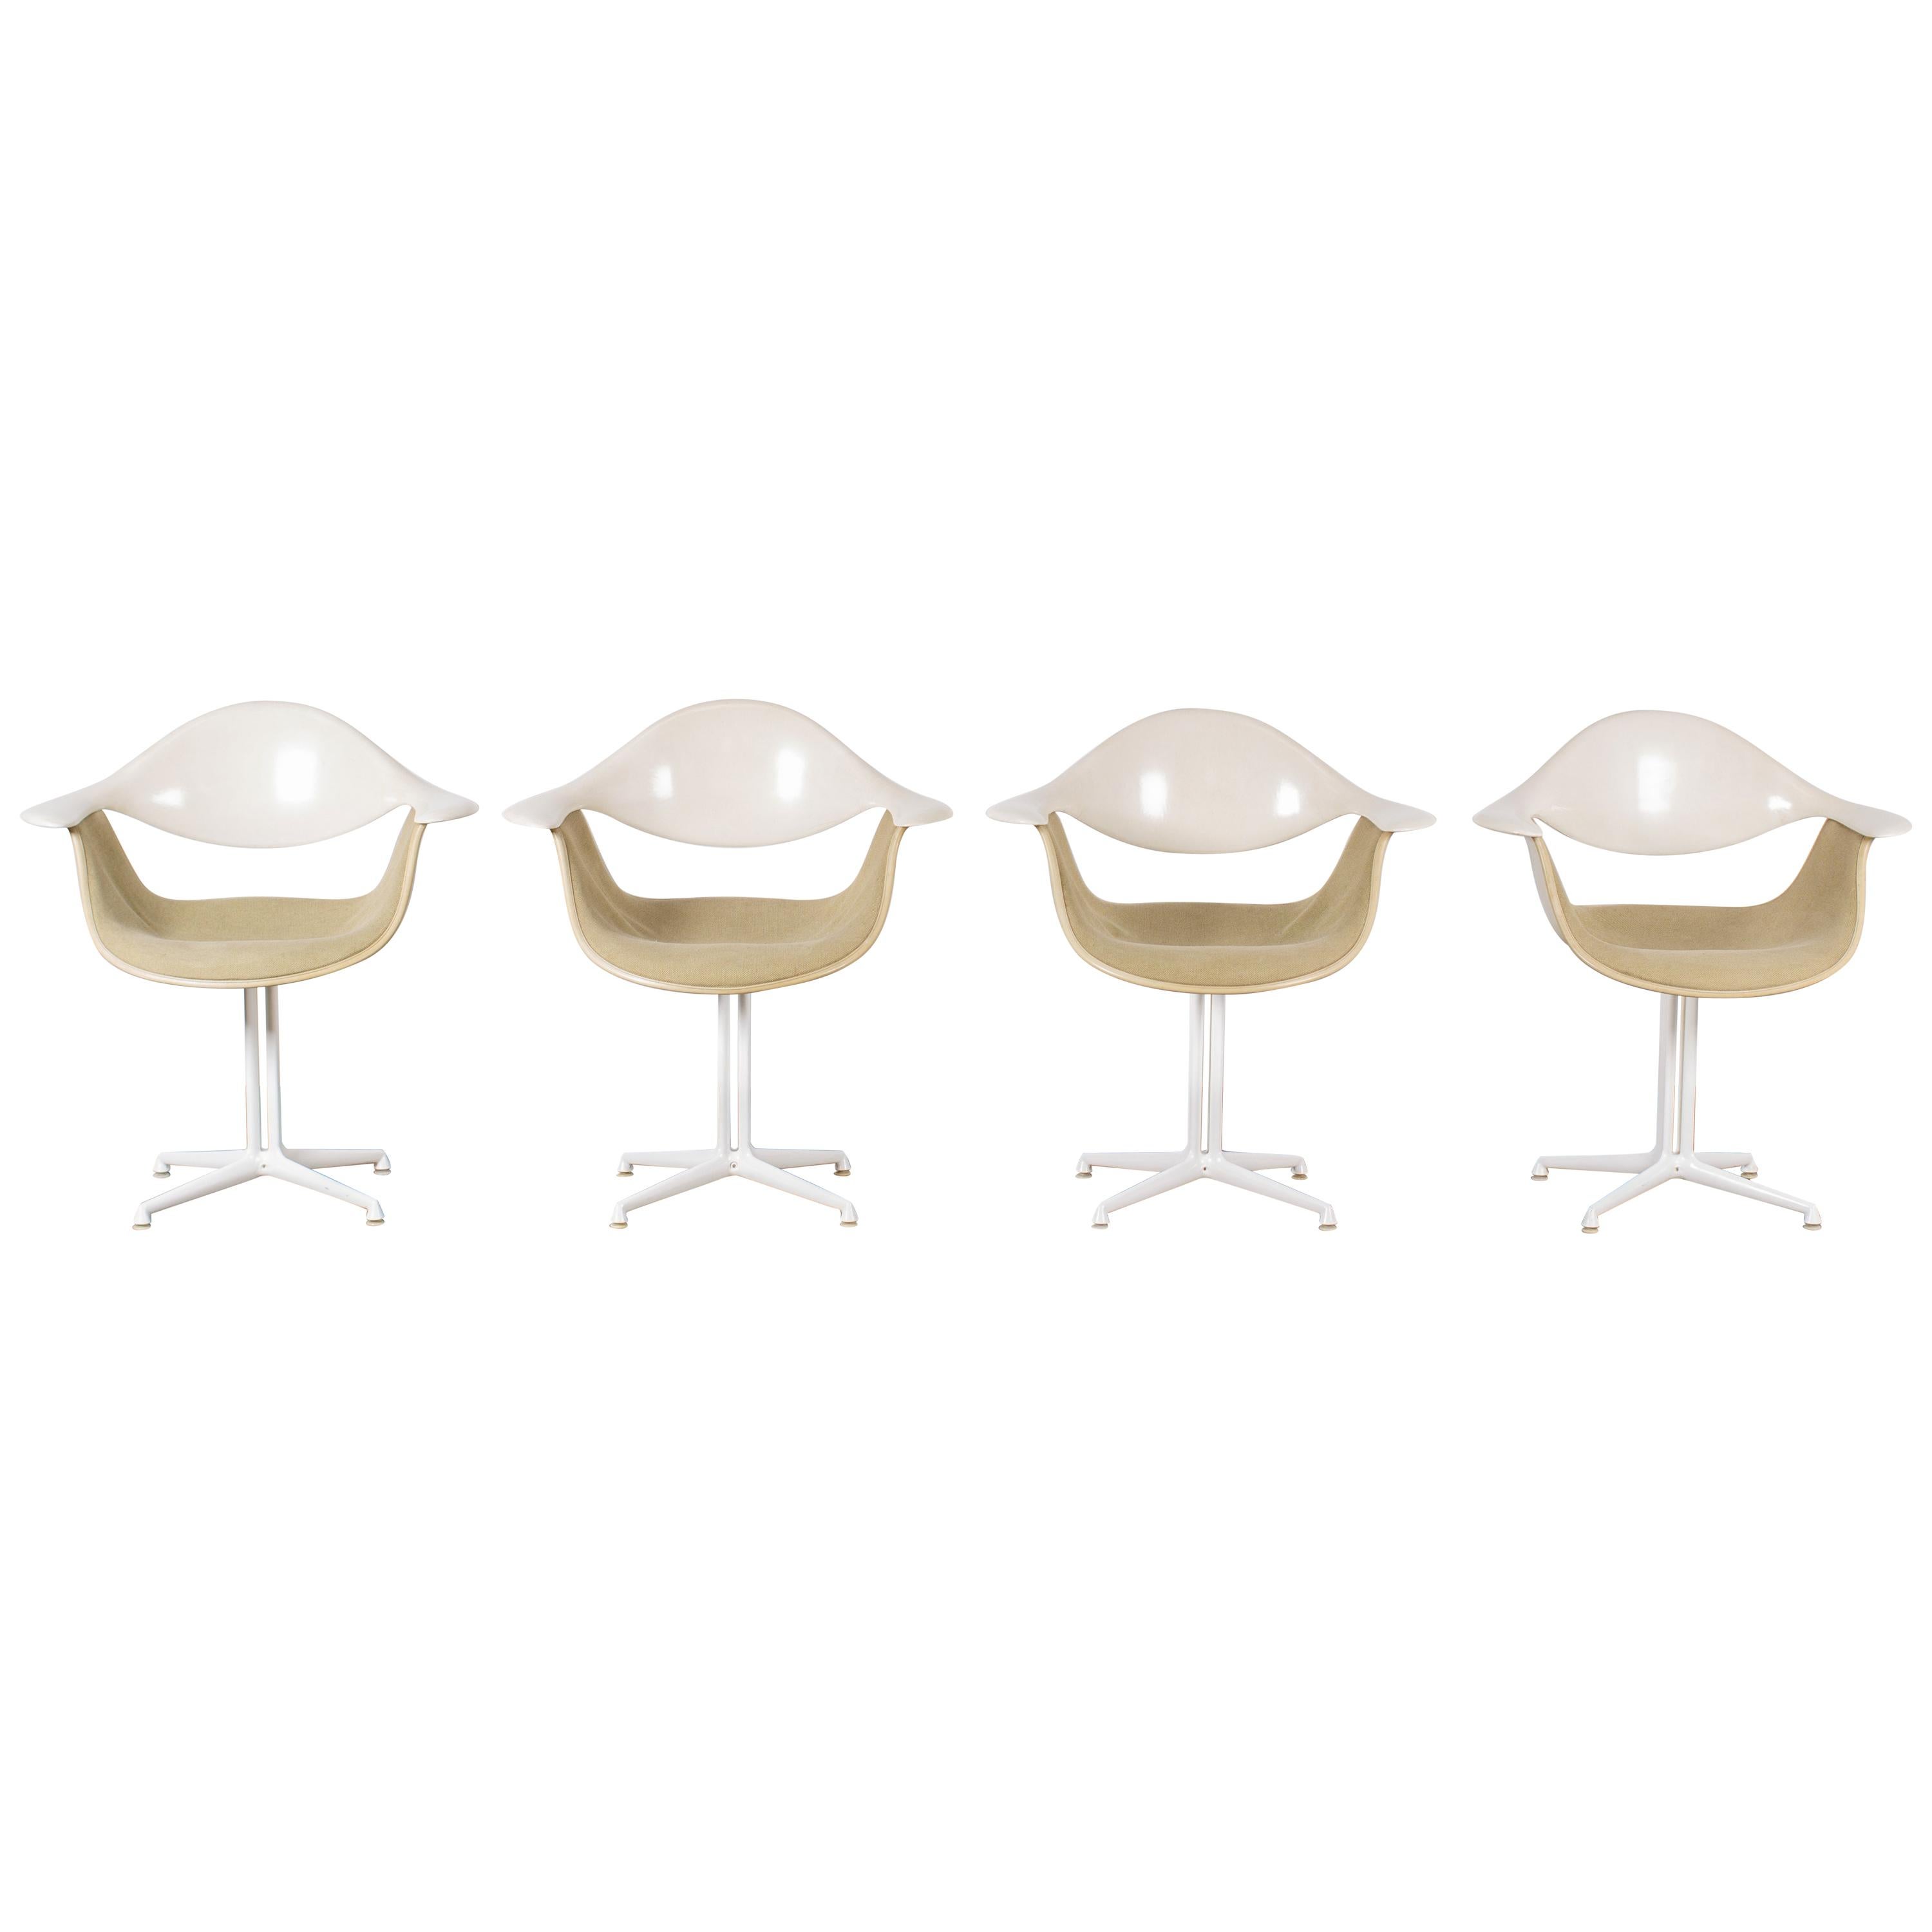 4 George Nelson & Charles Eames DAF Chairs for Herman Miller